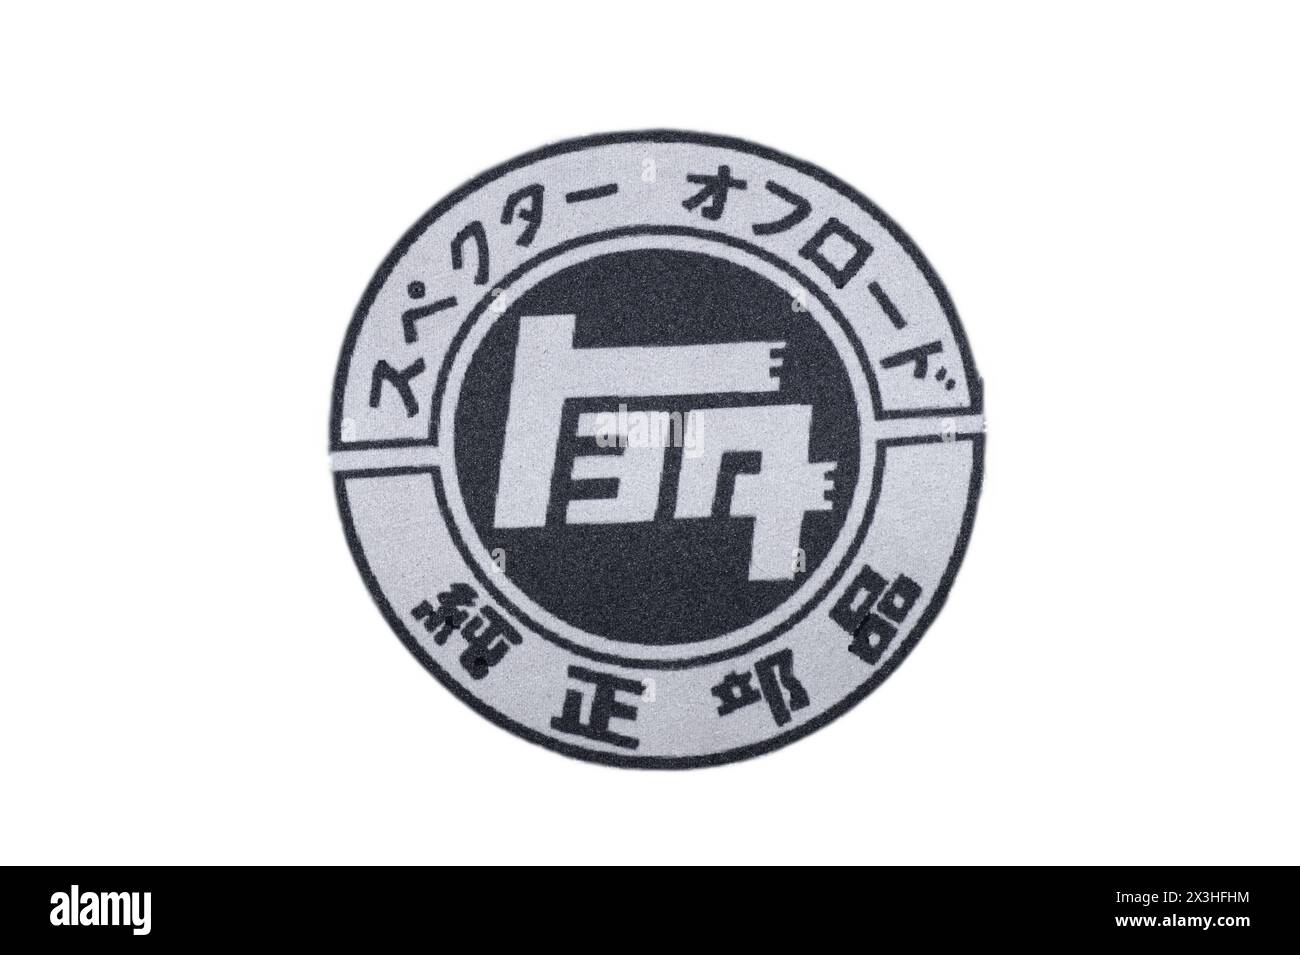 2-22-2024 Ocala, FL old school Toyoda Toyota genuine pure Specter or Spector offroad off road parts in round logo black and white design,  japanese le Stock Photo